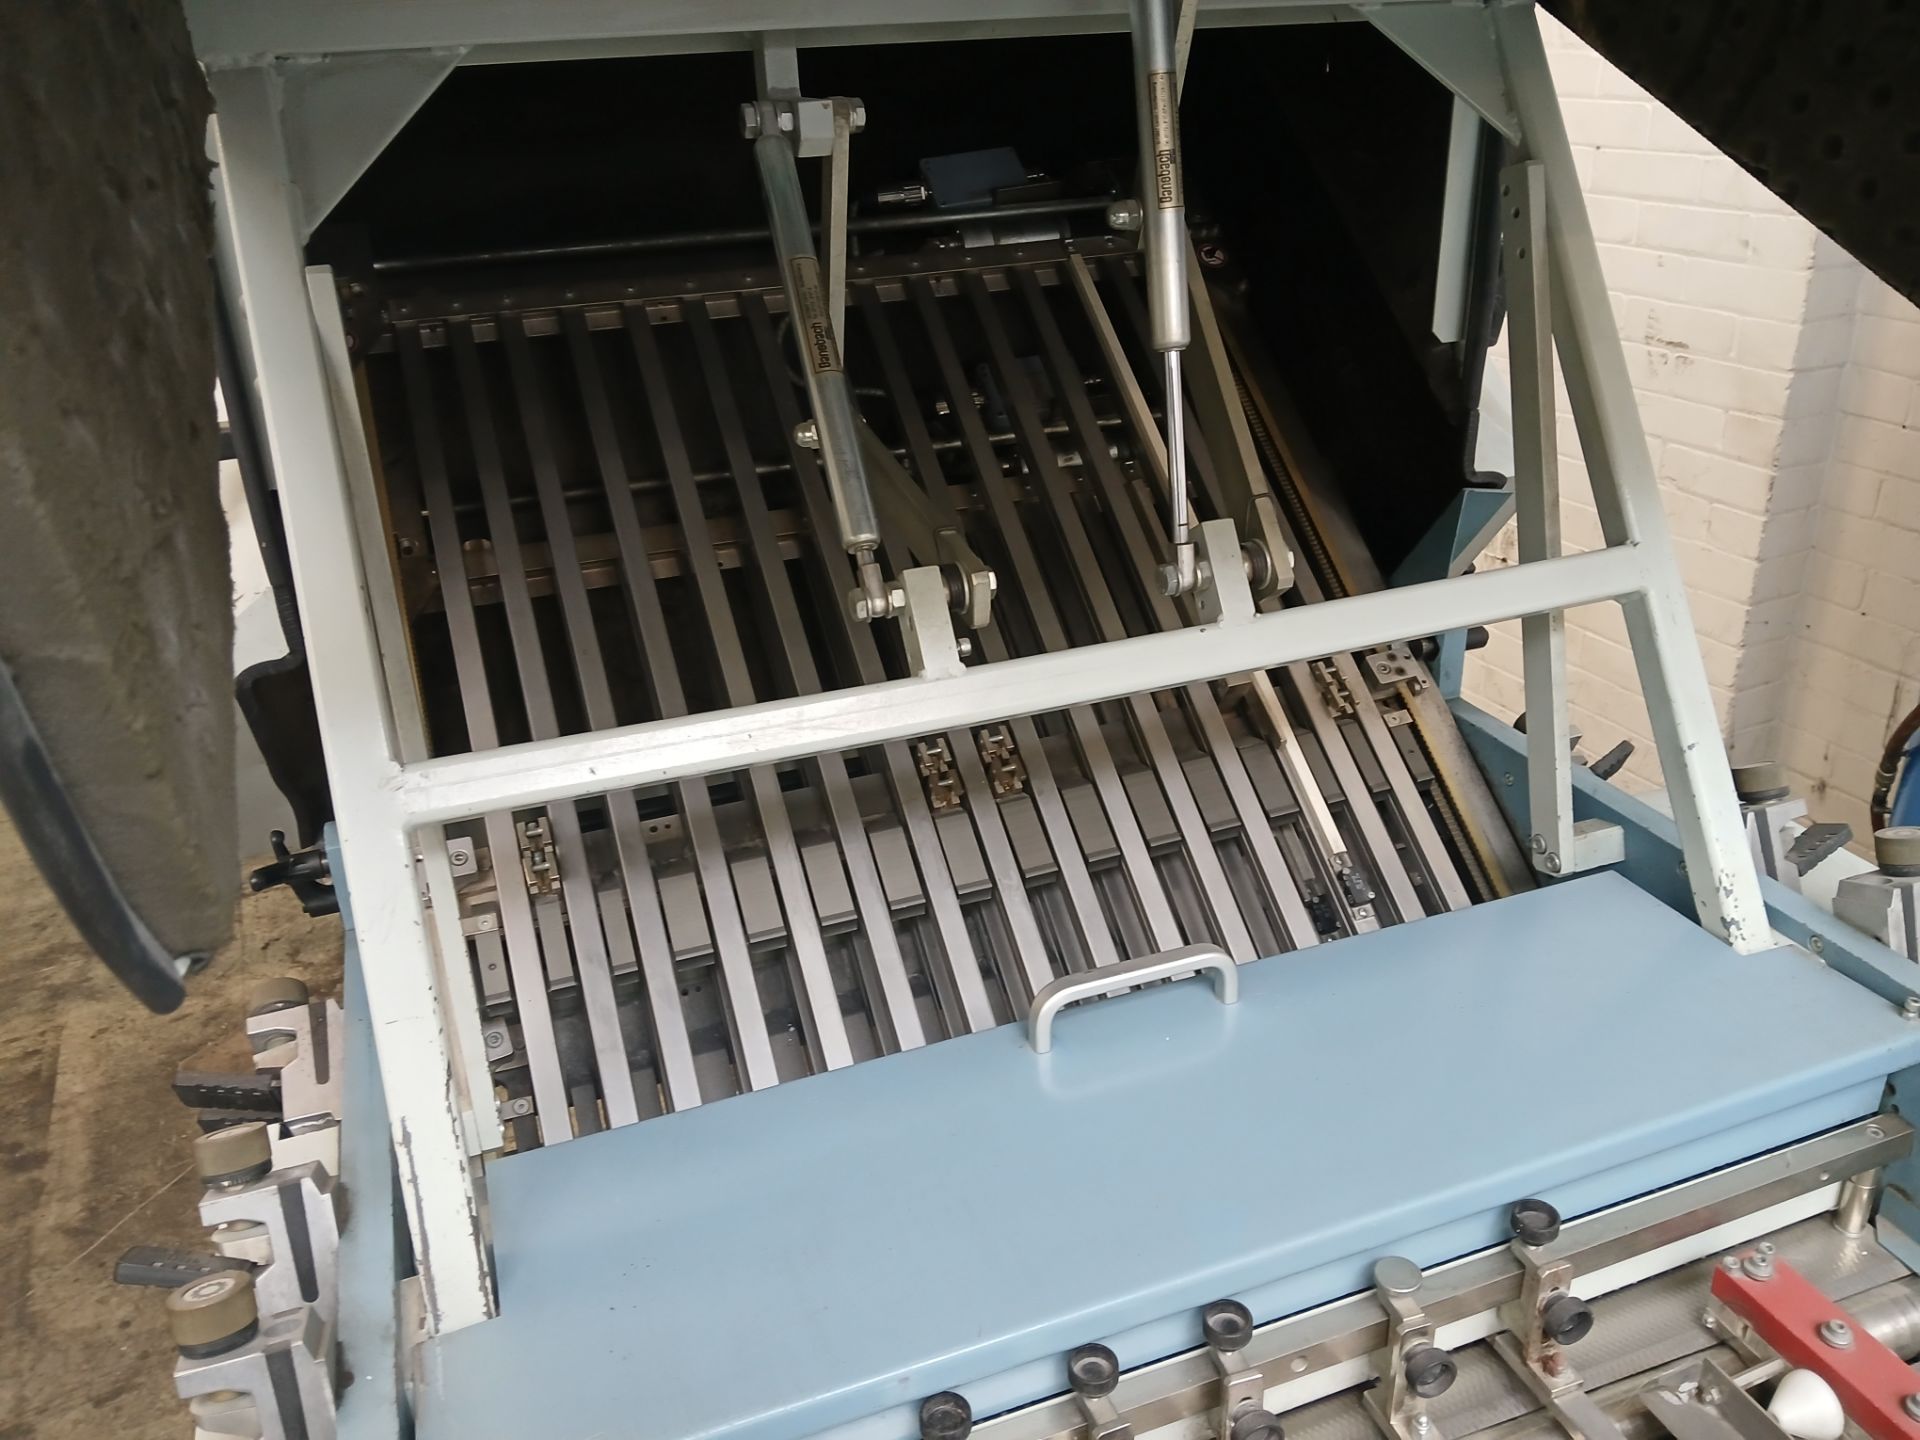 MBO T700 – 2 – 68/4 VN 2nd folding unit, Serial Number 003 19875 with additional double gate fold - Image 8 of 8